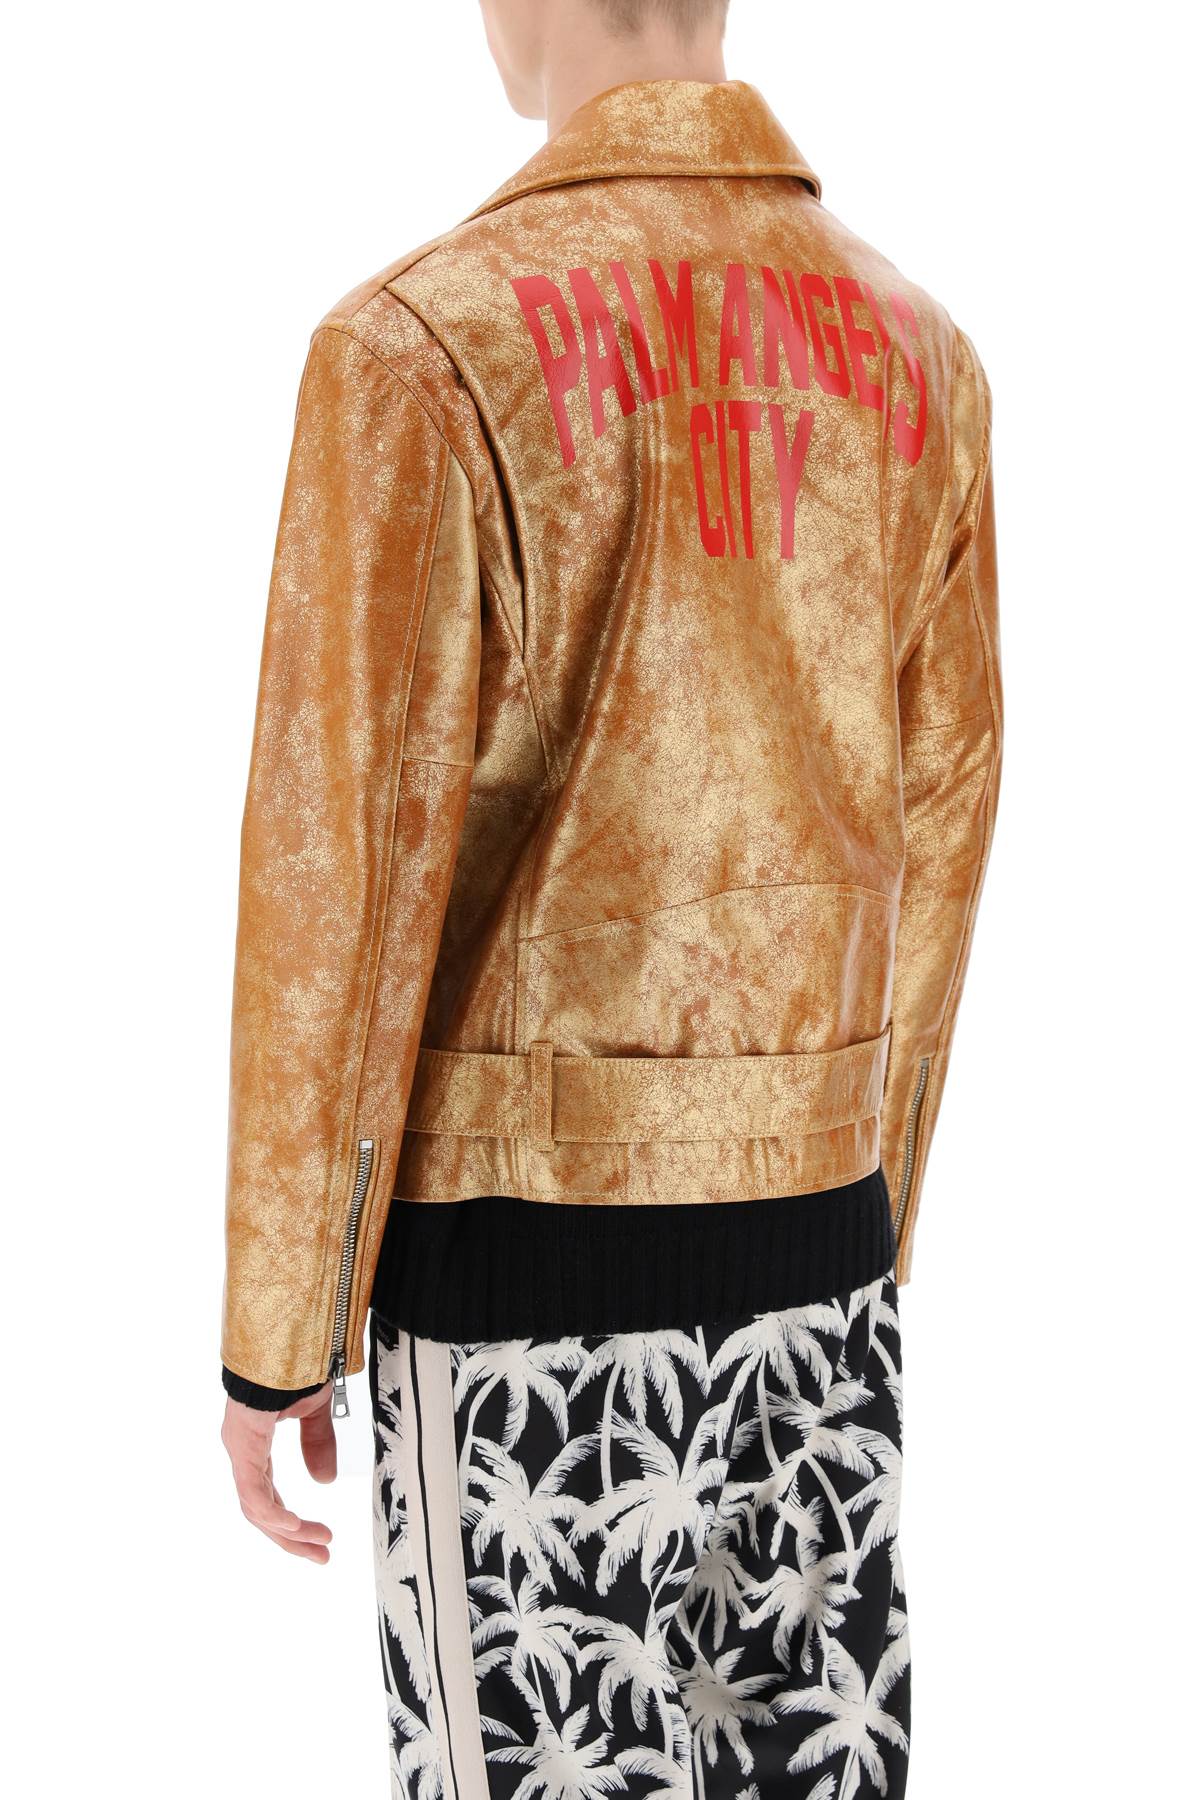 Palm angels pa city biker jacket in laminated leather-2